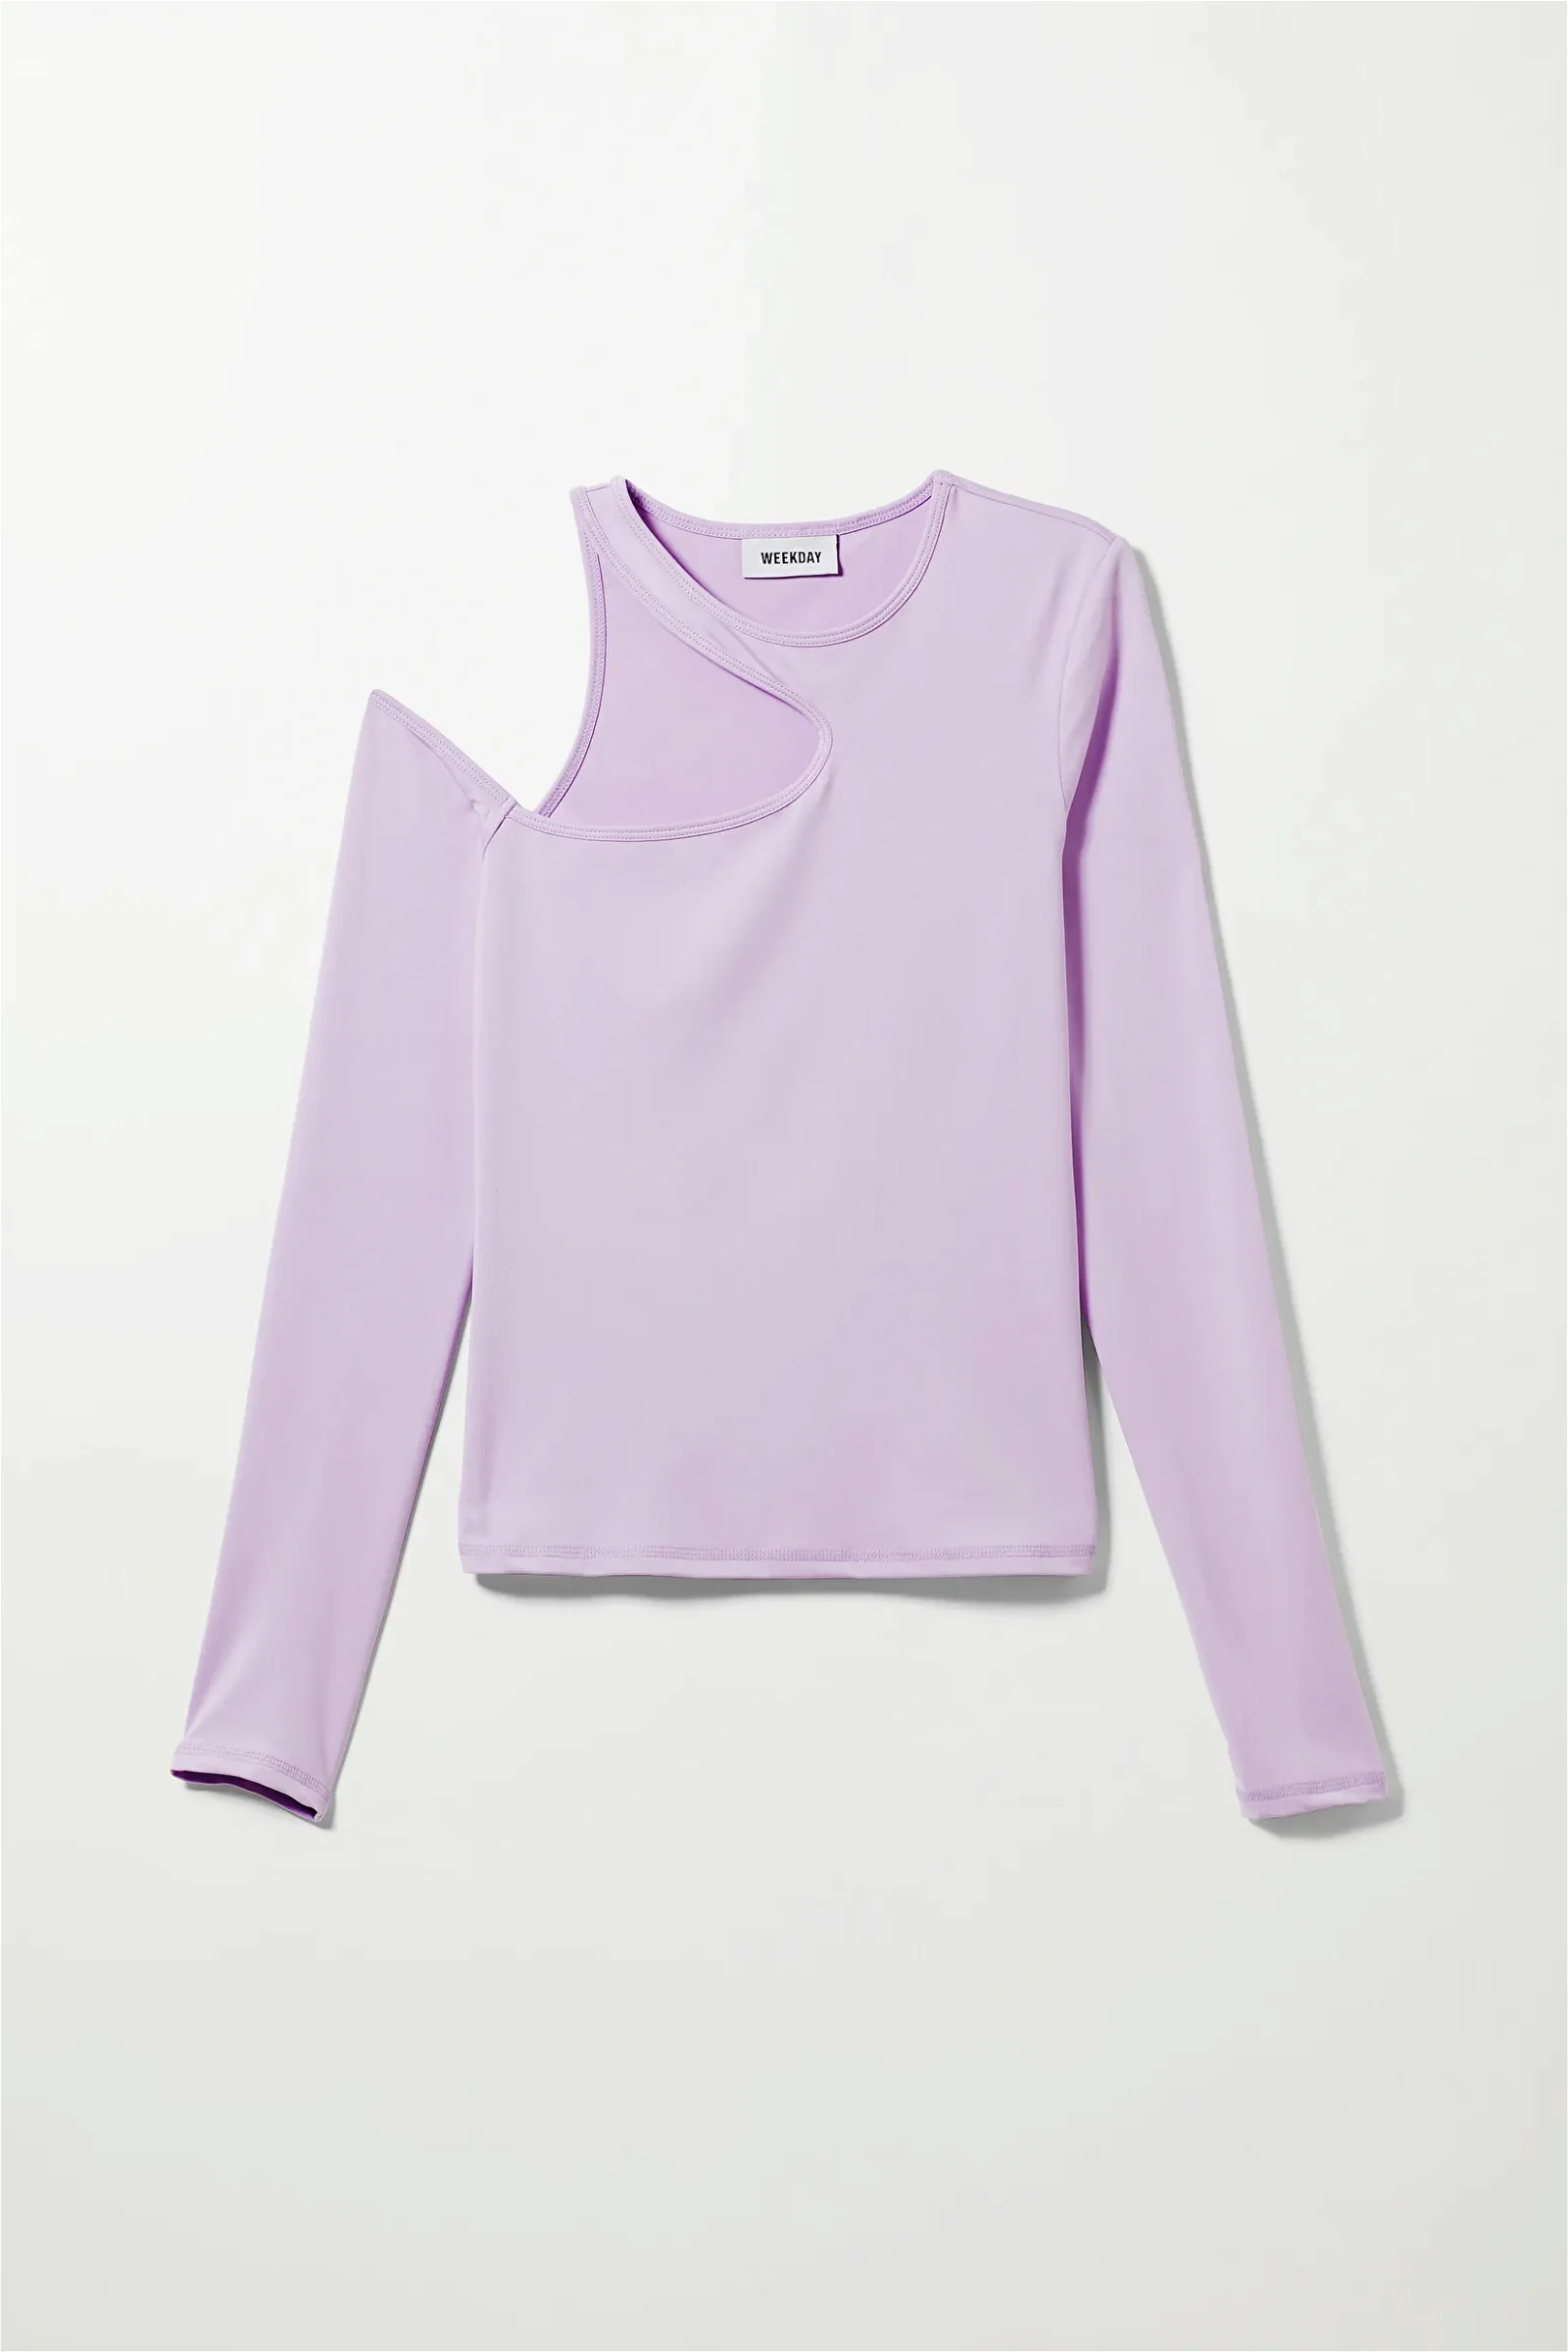 WEEKDAY Ambria Lilac in Endource | Long Sleeve